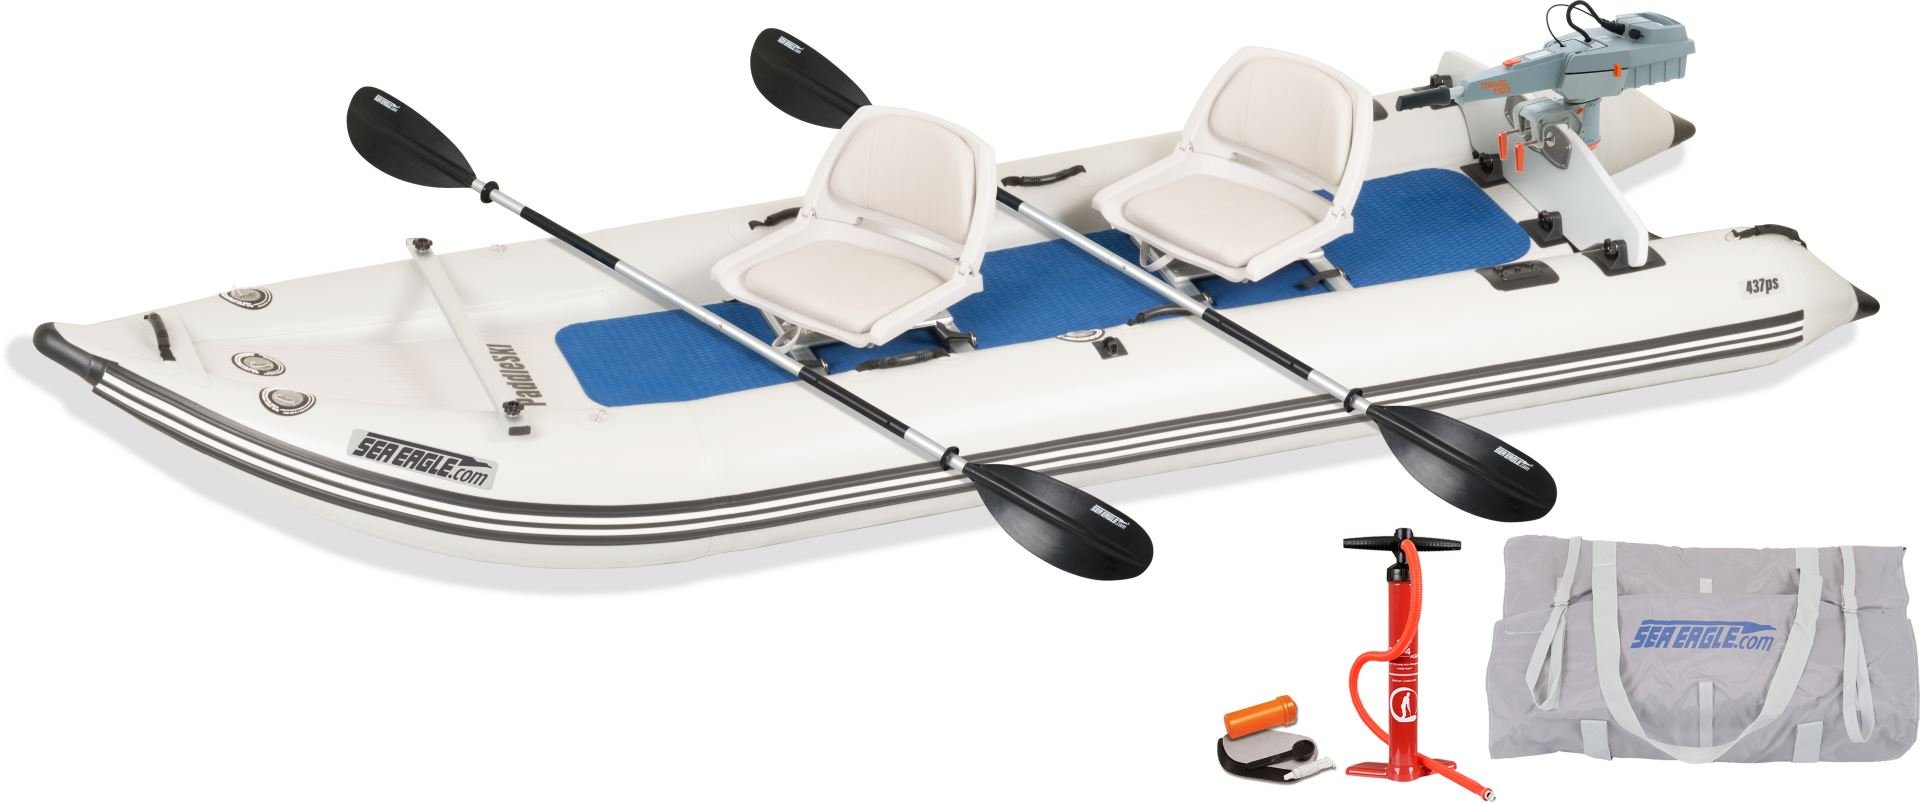 Sea Eagle 437PS PaddleSki Inflatable Boat Ultimate Package - Sunzout Outdoor Spaces LLC